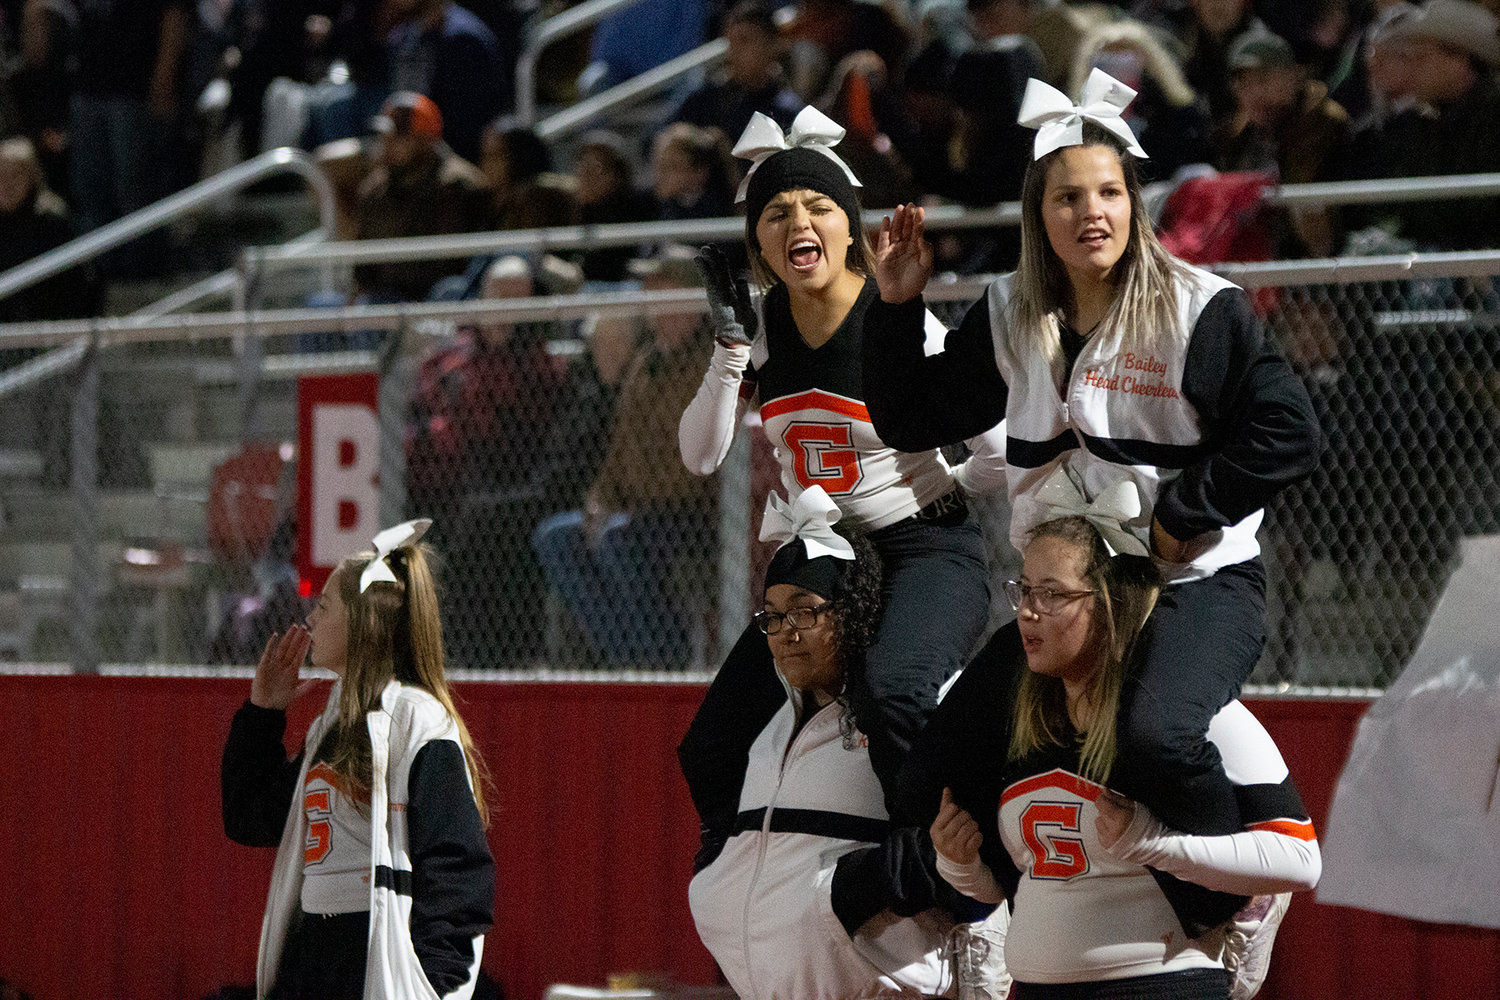 Whether it’s the cheerleaders, the Apache Flames, the Tomahawks, the Mighty Apache Band or even the ever-growing student section in the stands, this season’s support group has without question made fall sports fun for the Gonzales Apaches athletic program.